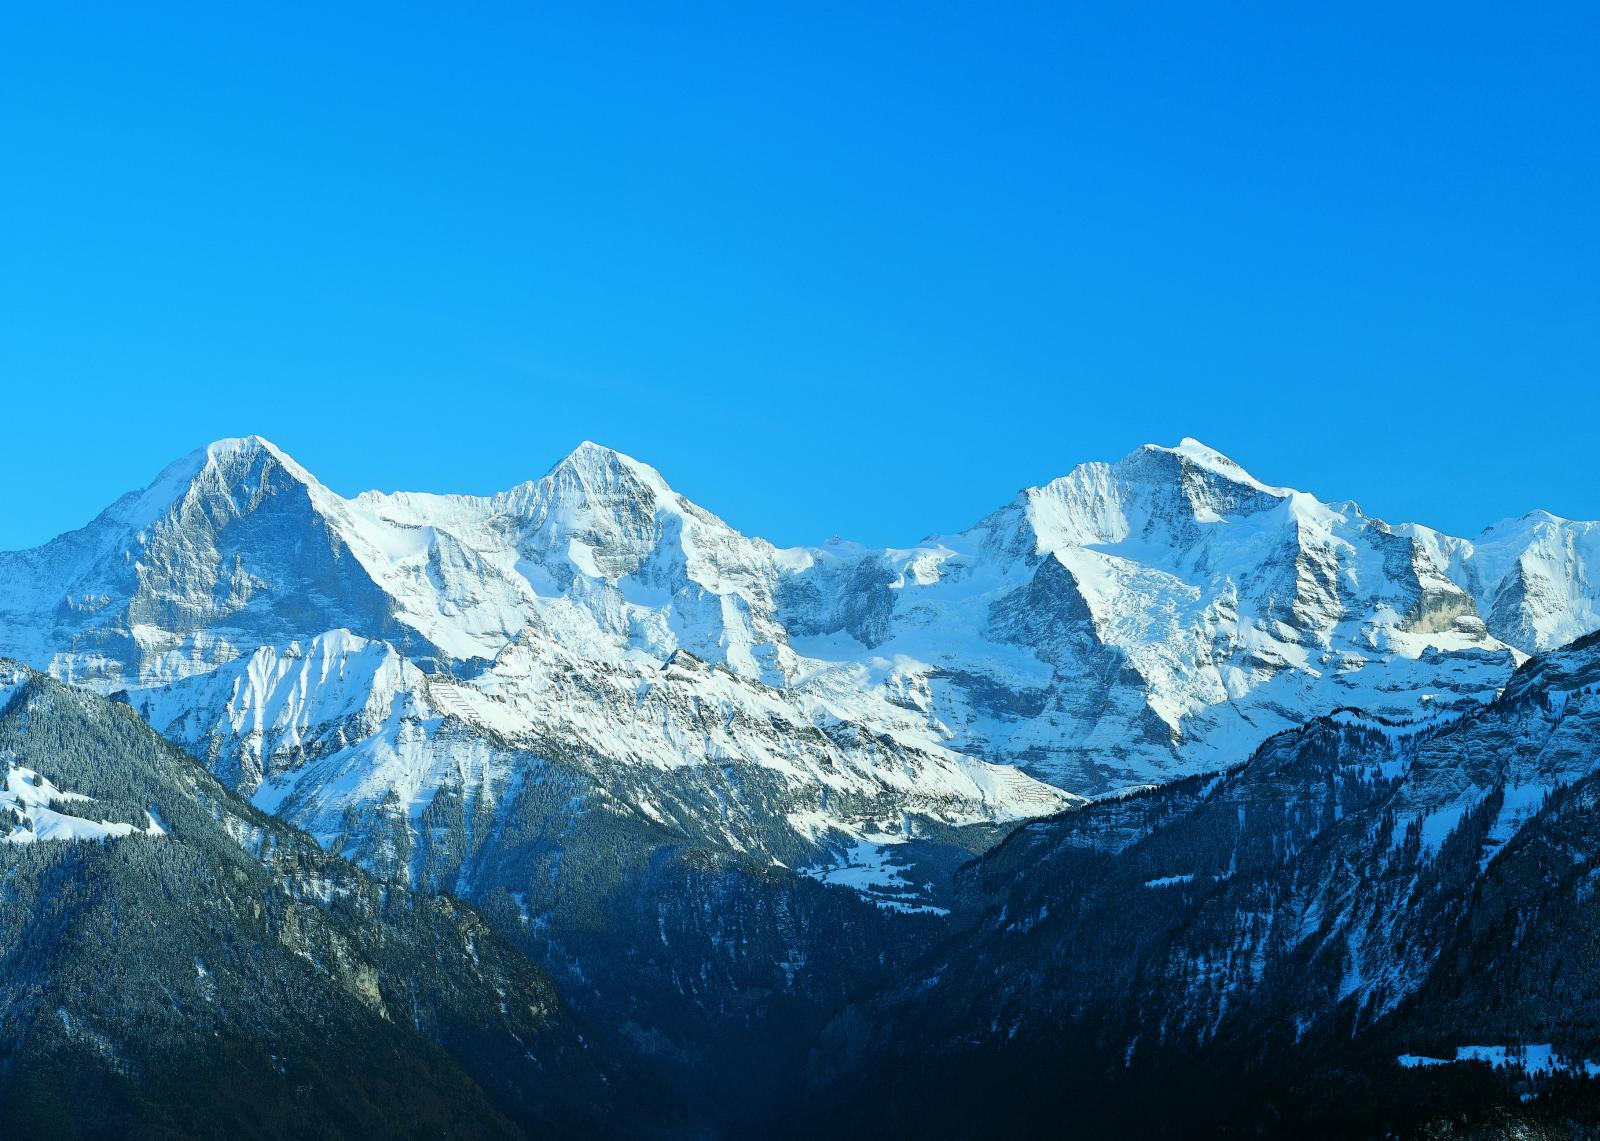 These are the Swiss Alps - all about Switzerland's mountain regions